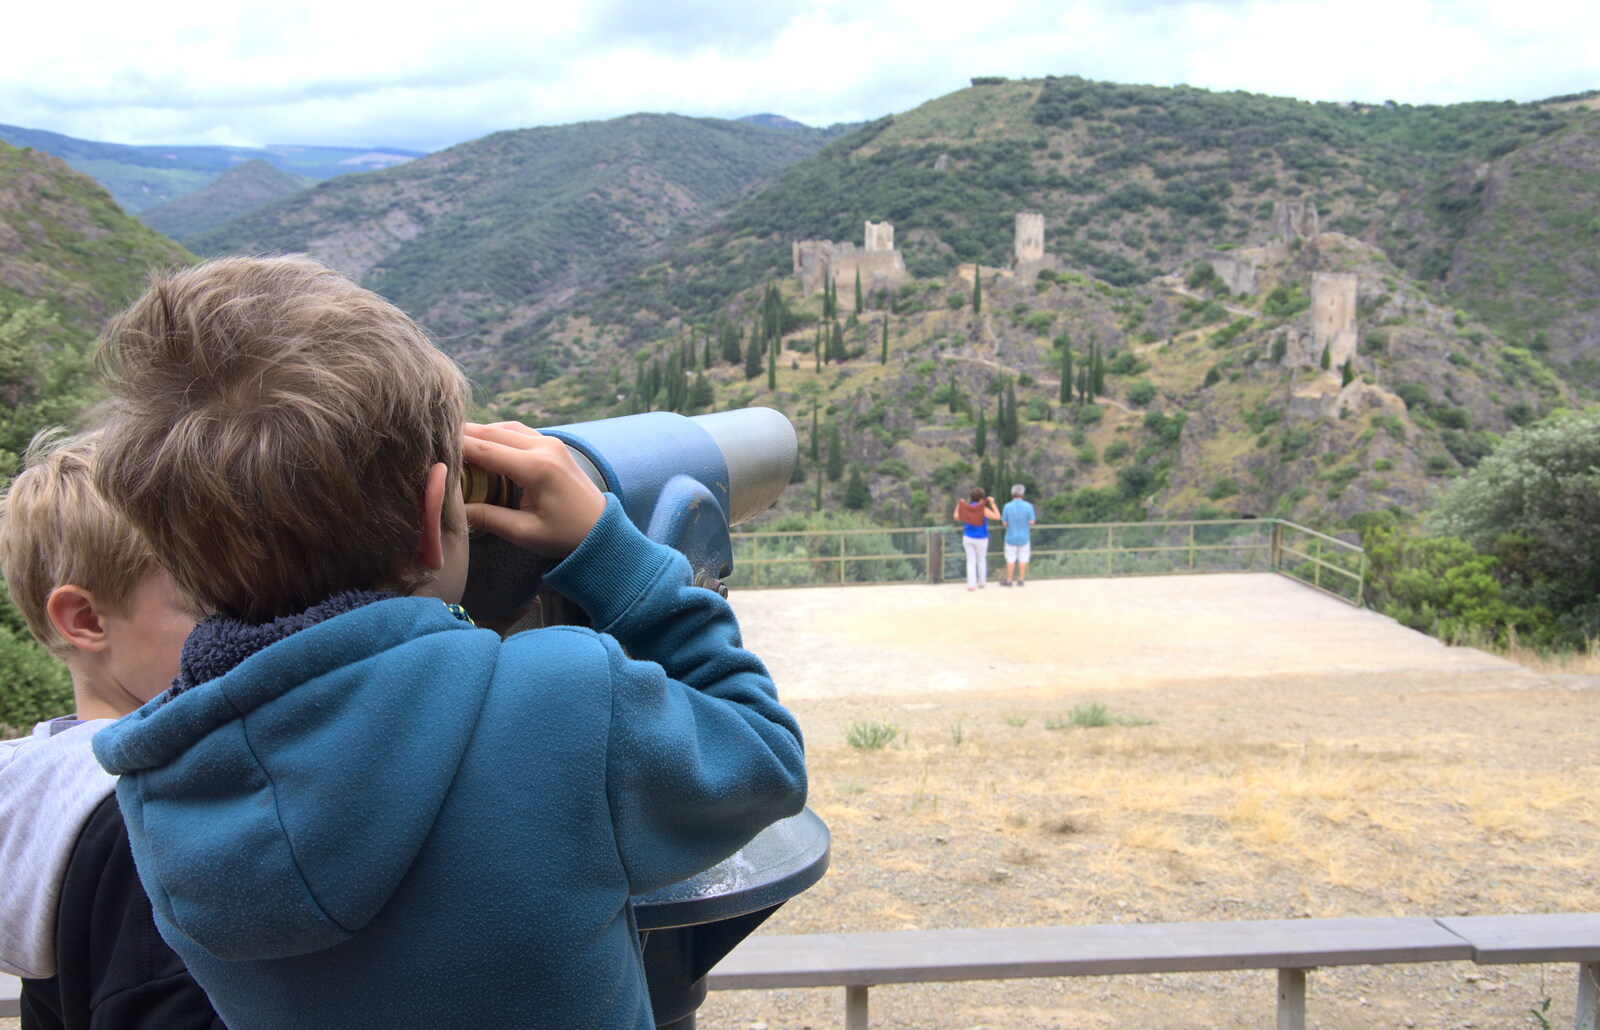 Fred uses the telescope from The Château Comtal, Lastours and the Journey Home, Carcassonne, Aude, France - 14th August 2018